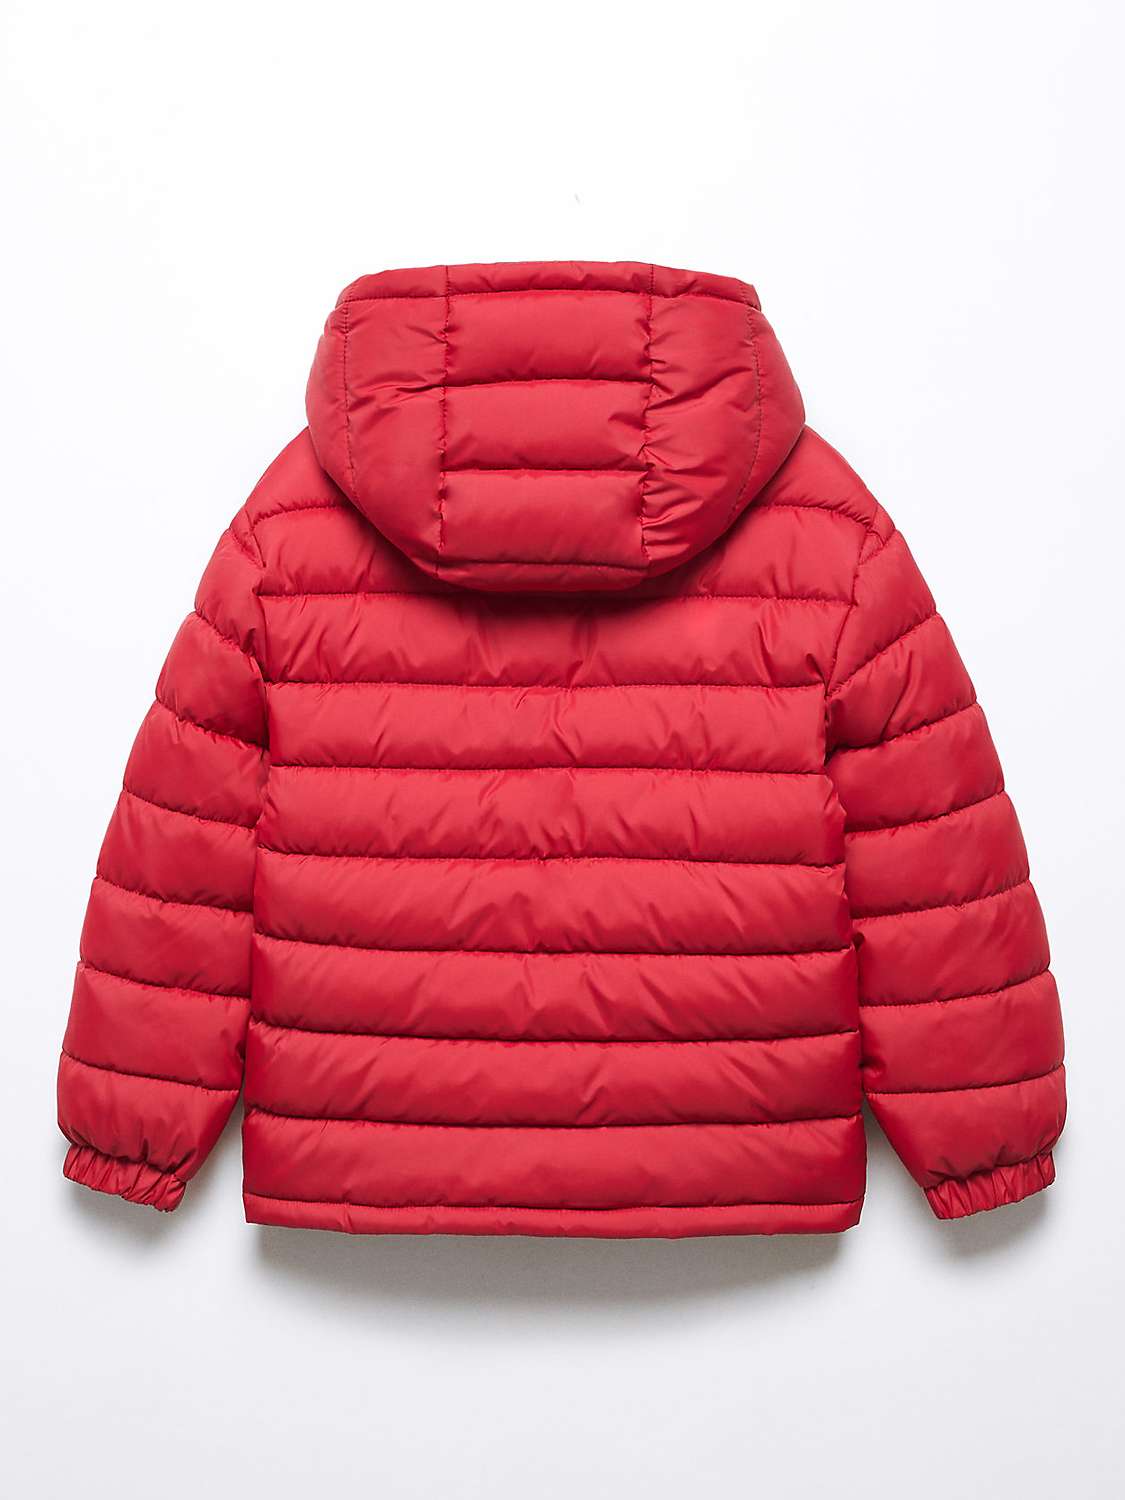 Buy Mango Kids' Paco Reversible Quilted Hooded Anorak, Red/Navy Online at johnlewis.com